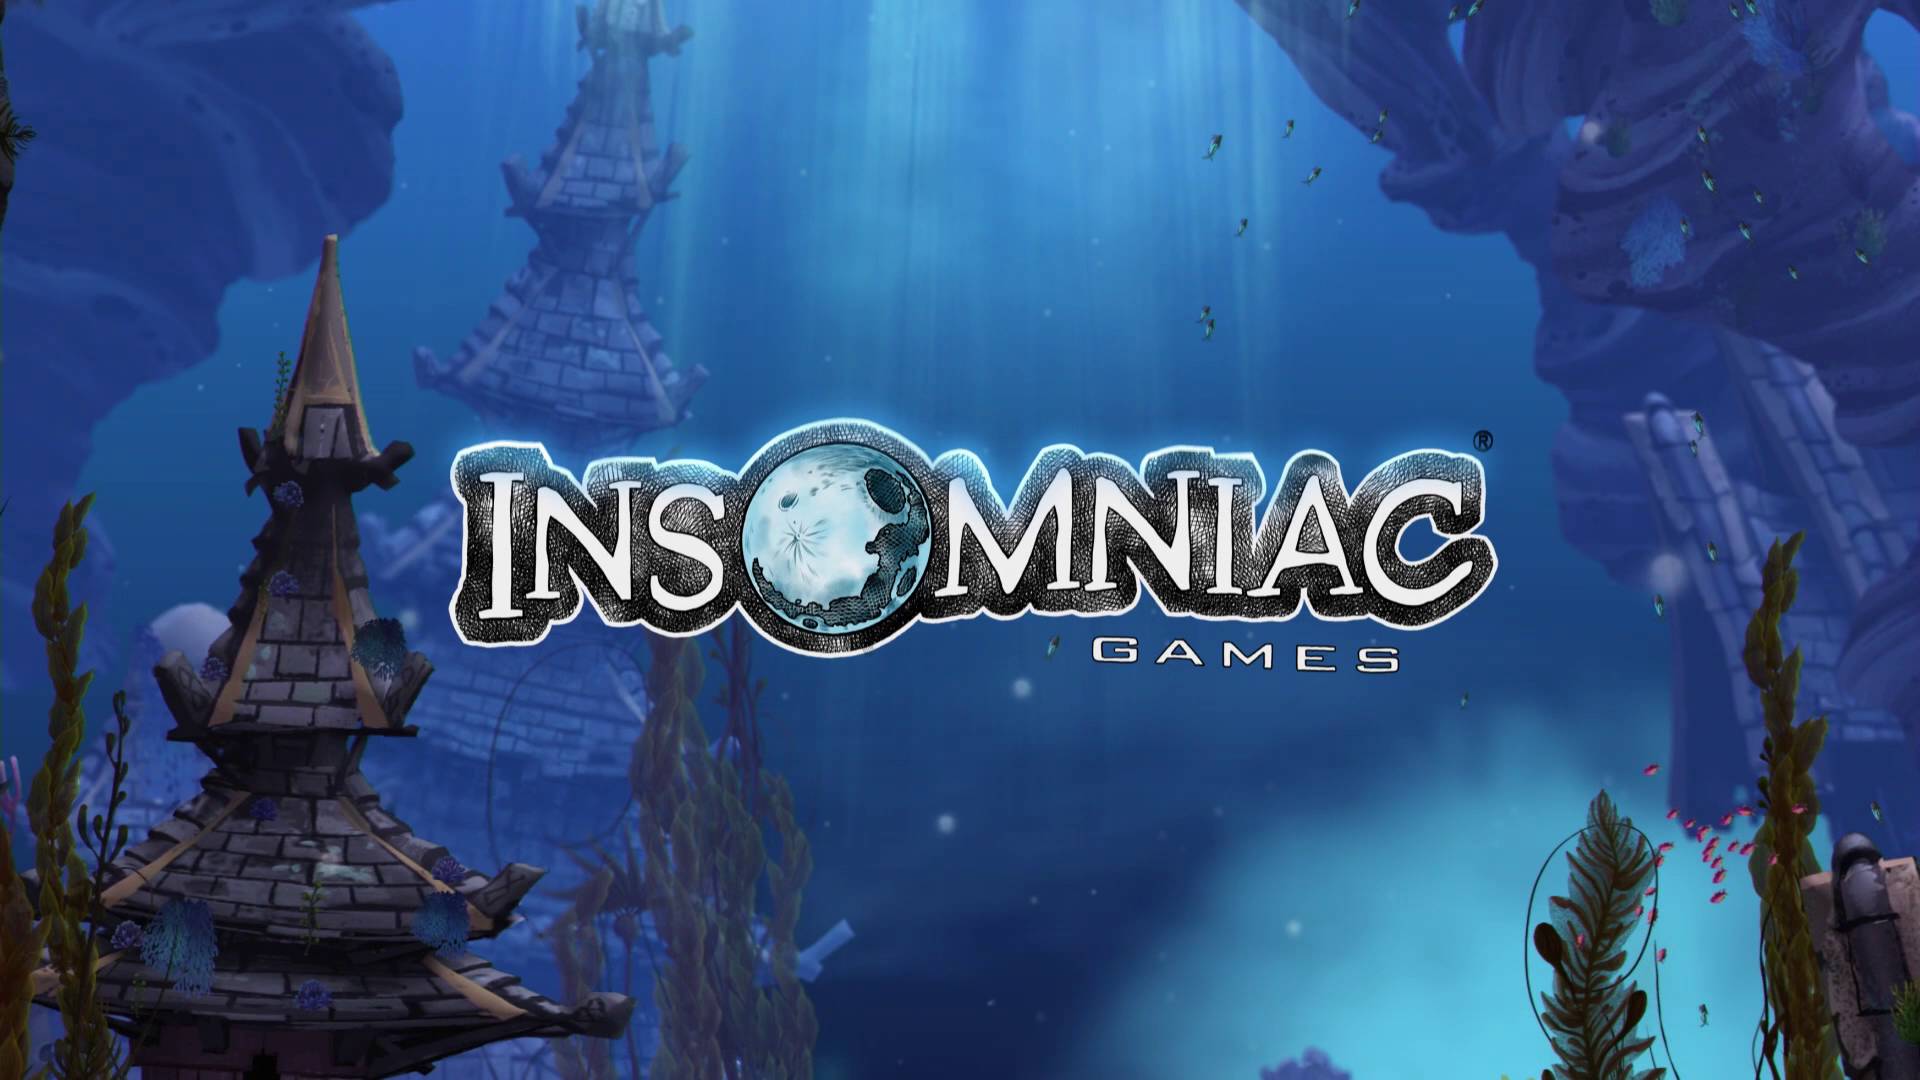 Fra matematiker lidenskabelig Insomniac reveal 2 new VR games, release dates for Song of the Deep and  Edge of Nowhere | GodisaGeek.com